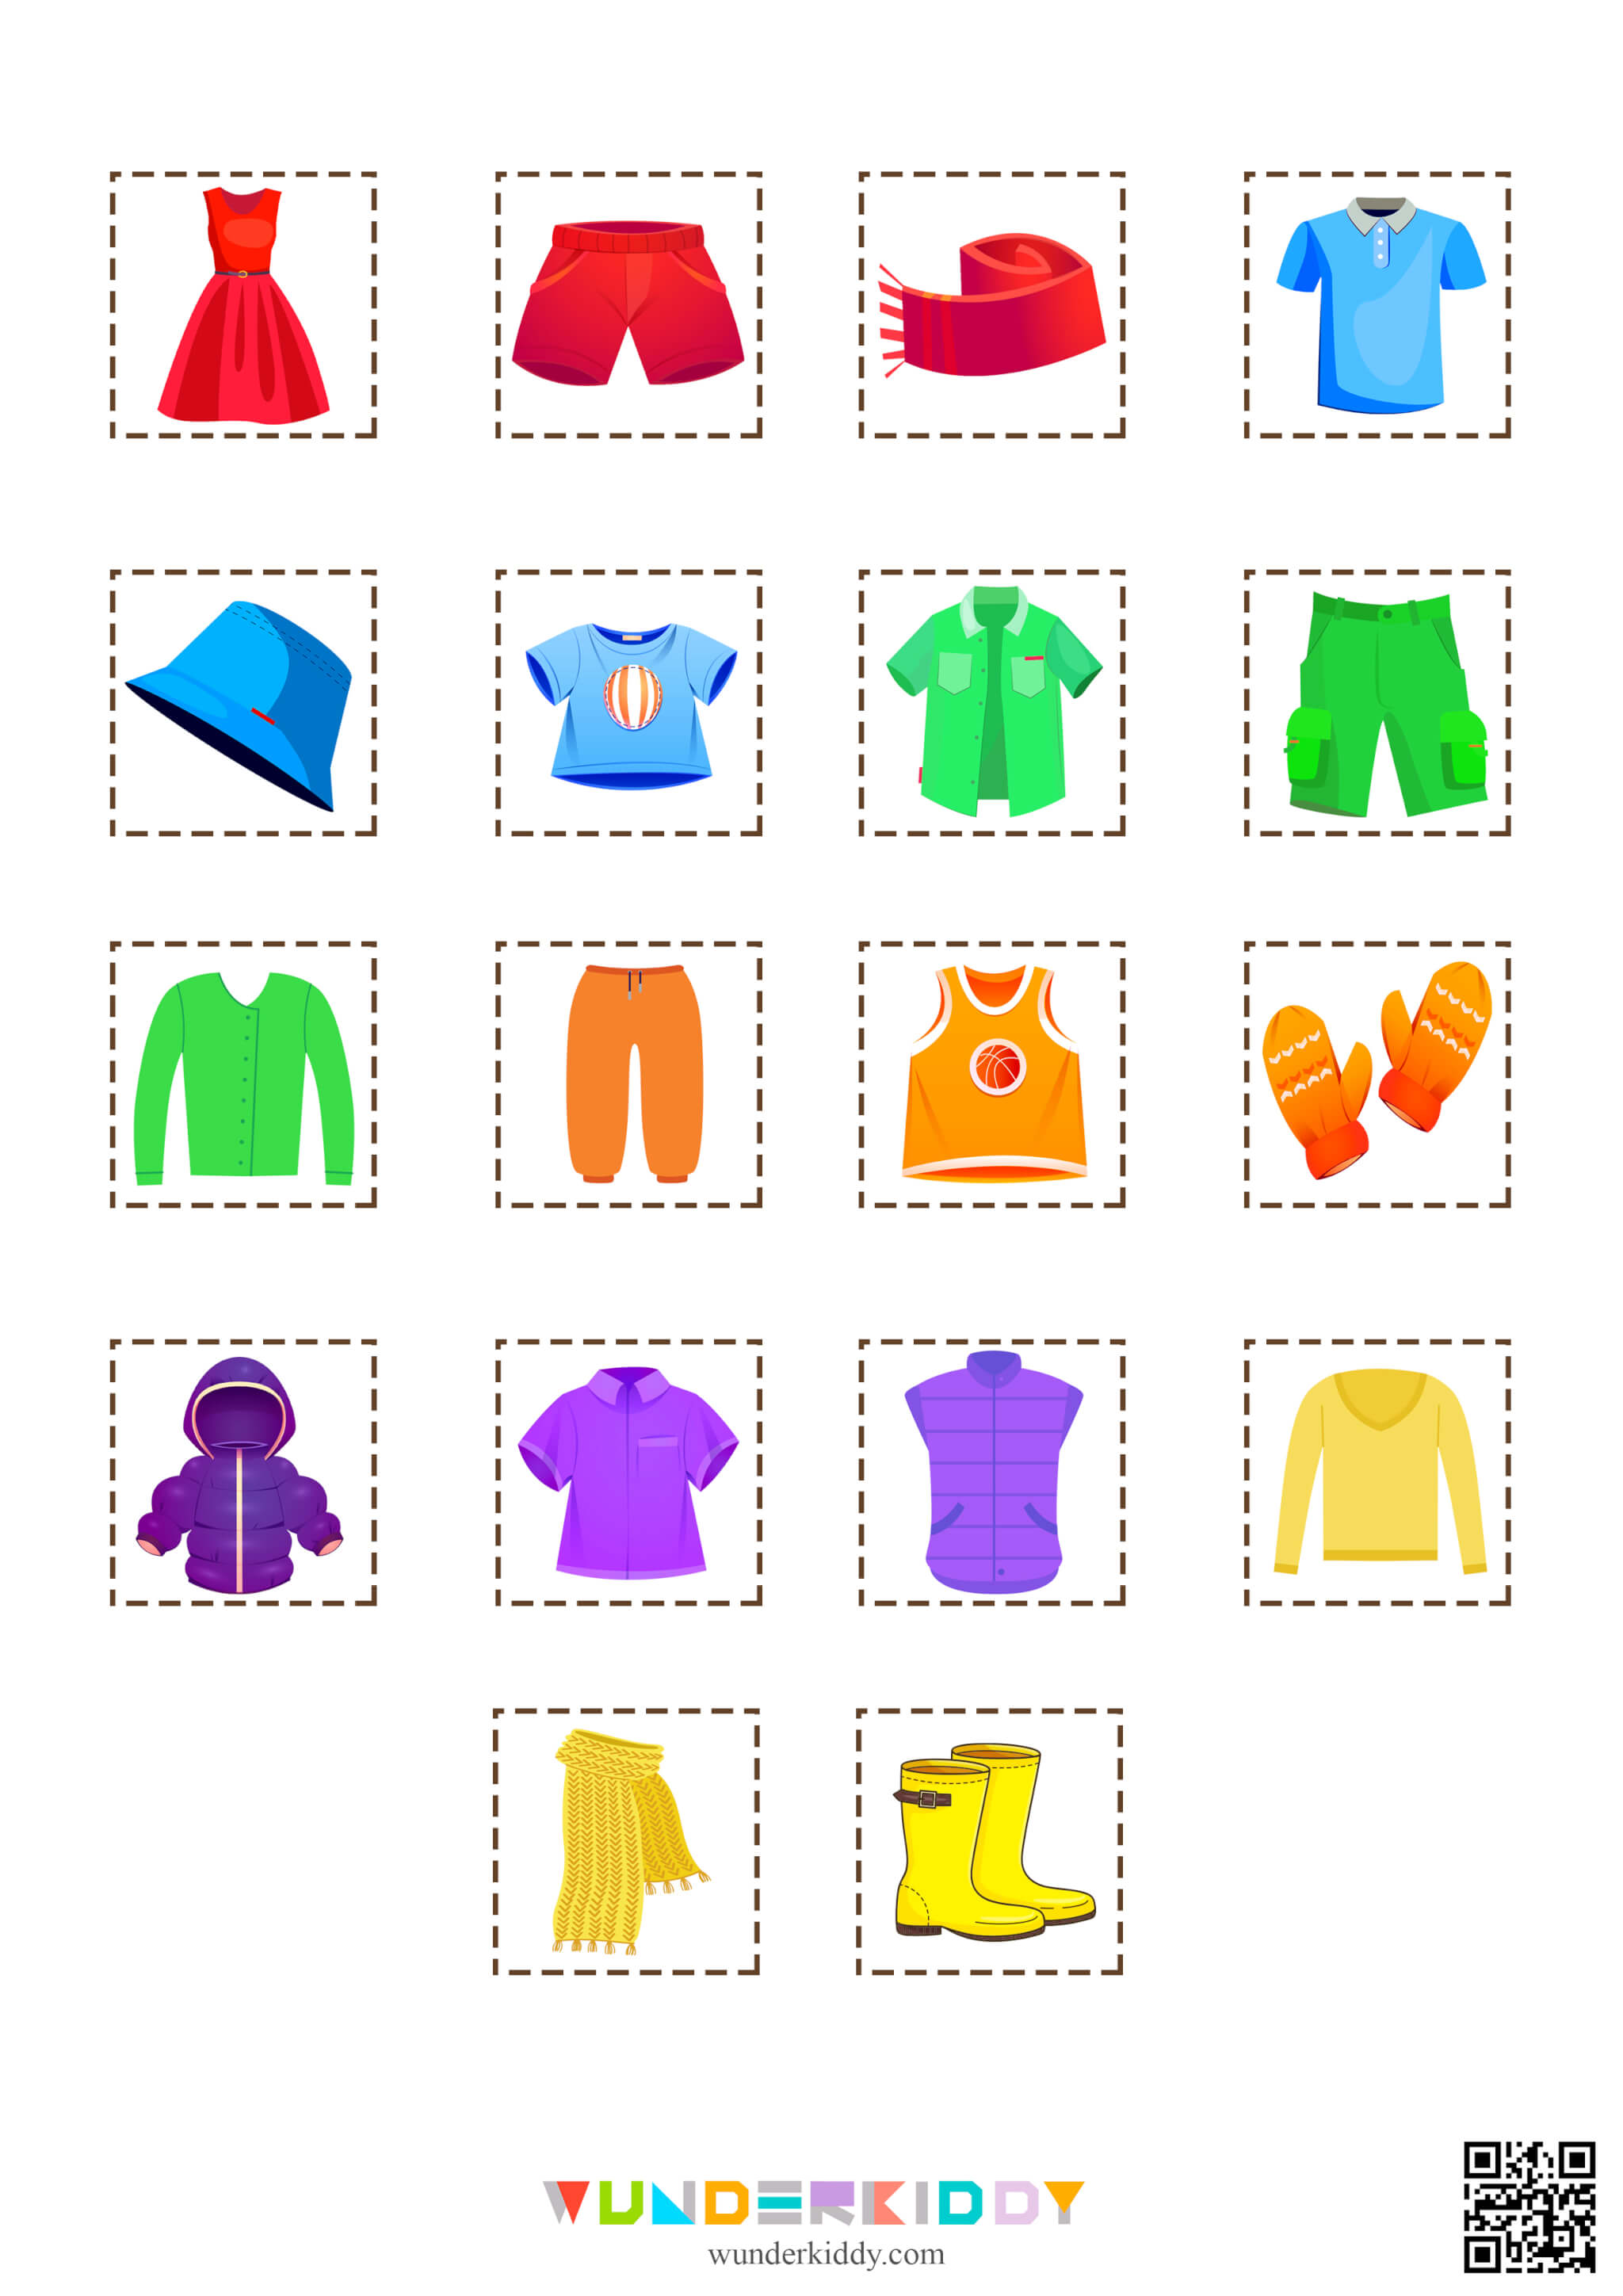 Colors Sorting Activity Clothes Closets - Image 4